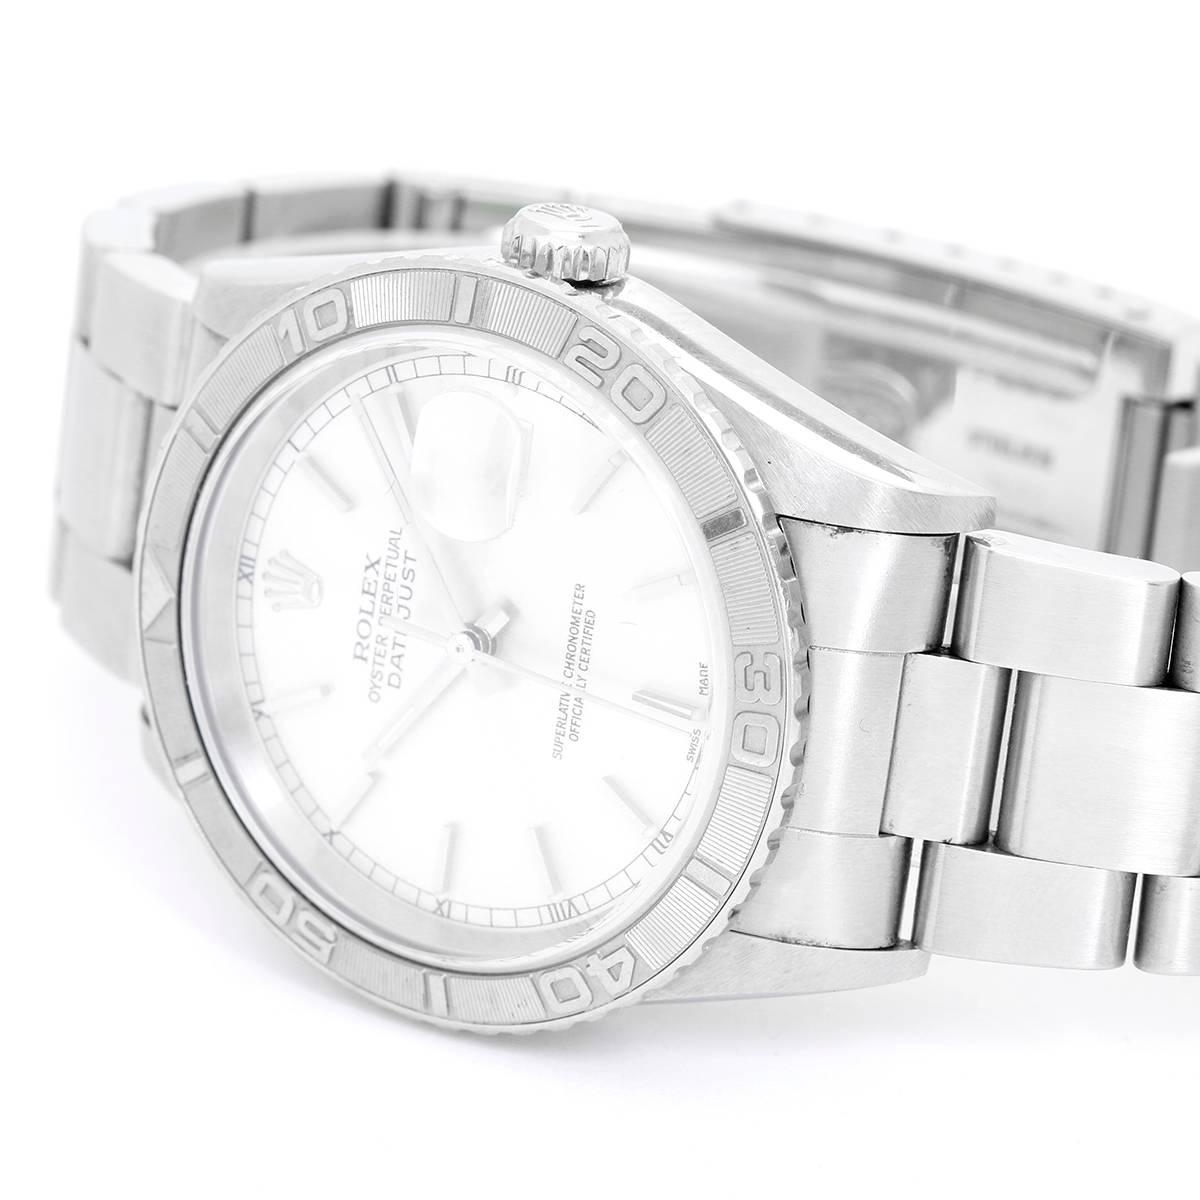 Rolex Turnograph Datejust  Men's Steel Watch 16264 -  Automatic winding, 31 jewels, Quickset, sapphire crystal. 	Stainless steel case with 18k white gold Thunderbird bezel (36mm diameter). Silvered  dial with stick markers; date. Stainless steel